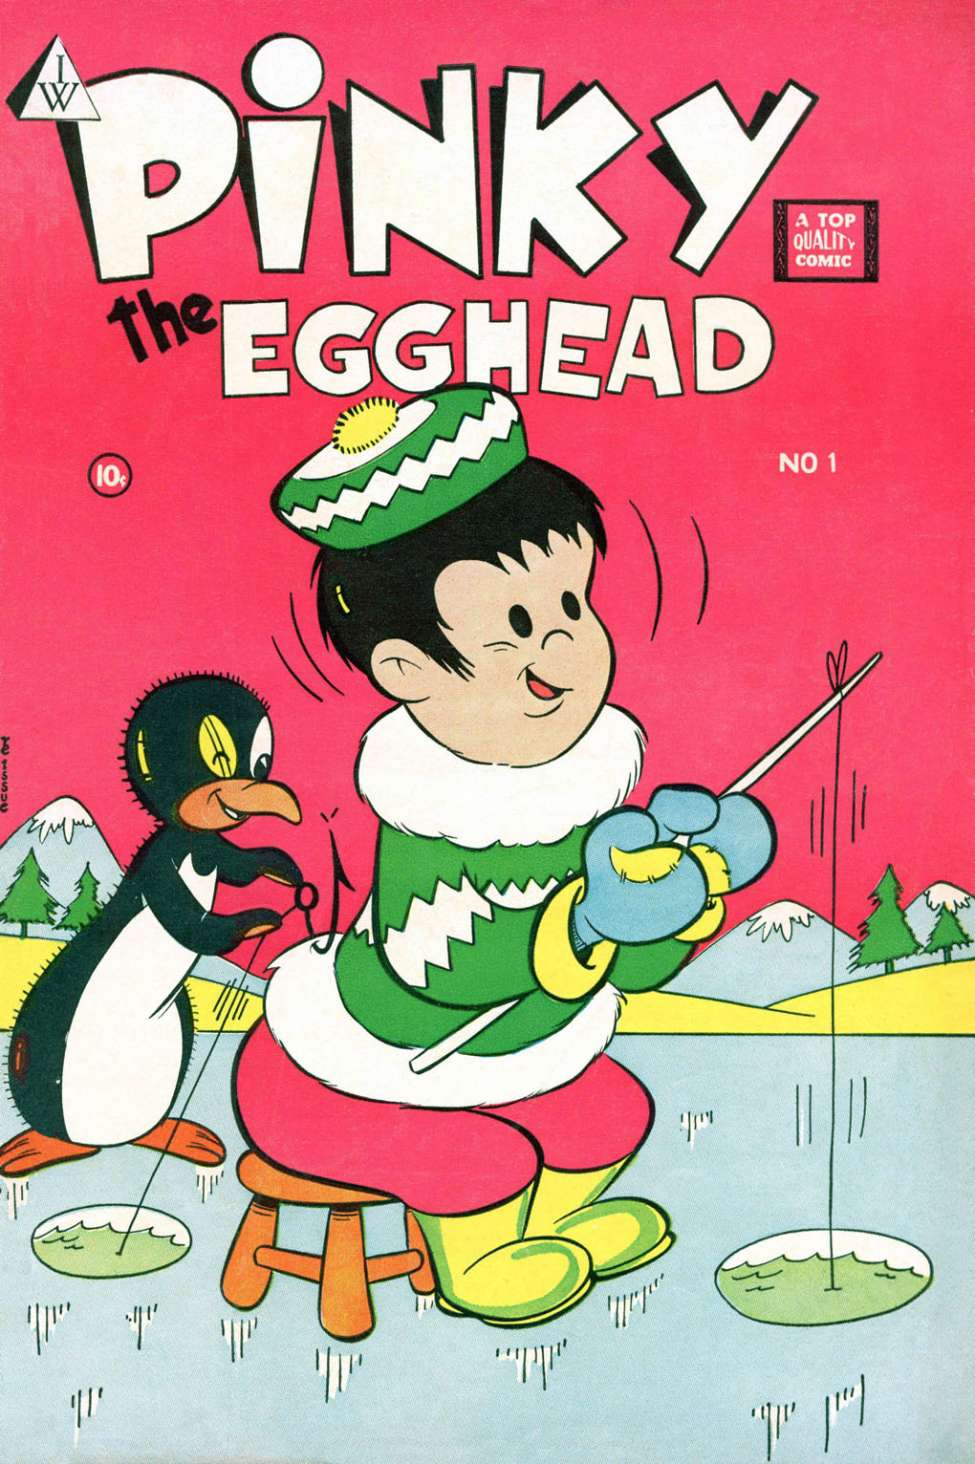 Book Cover For Pinky the Egghead 1 - Version 2